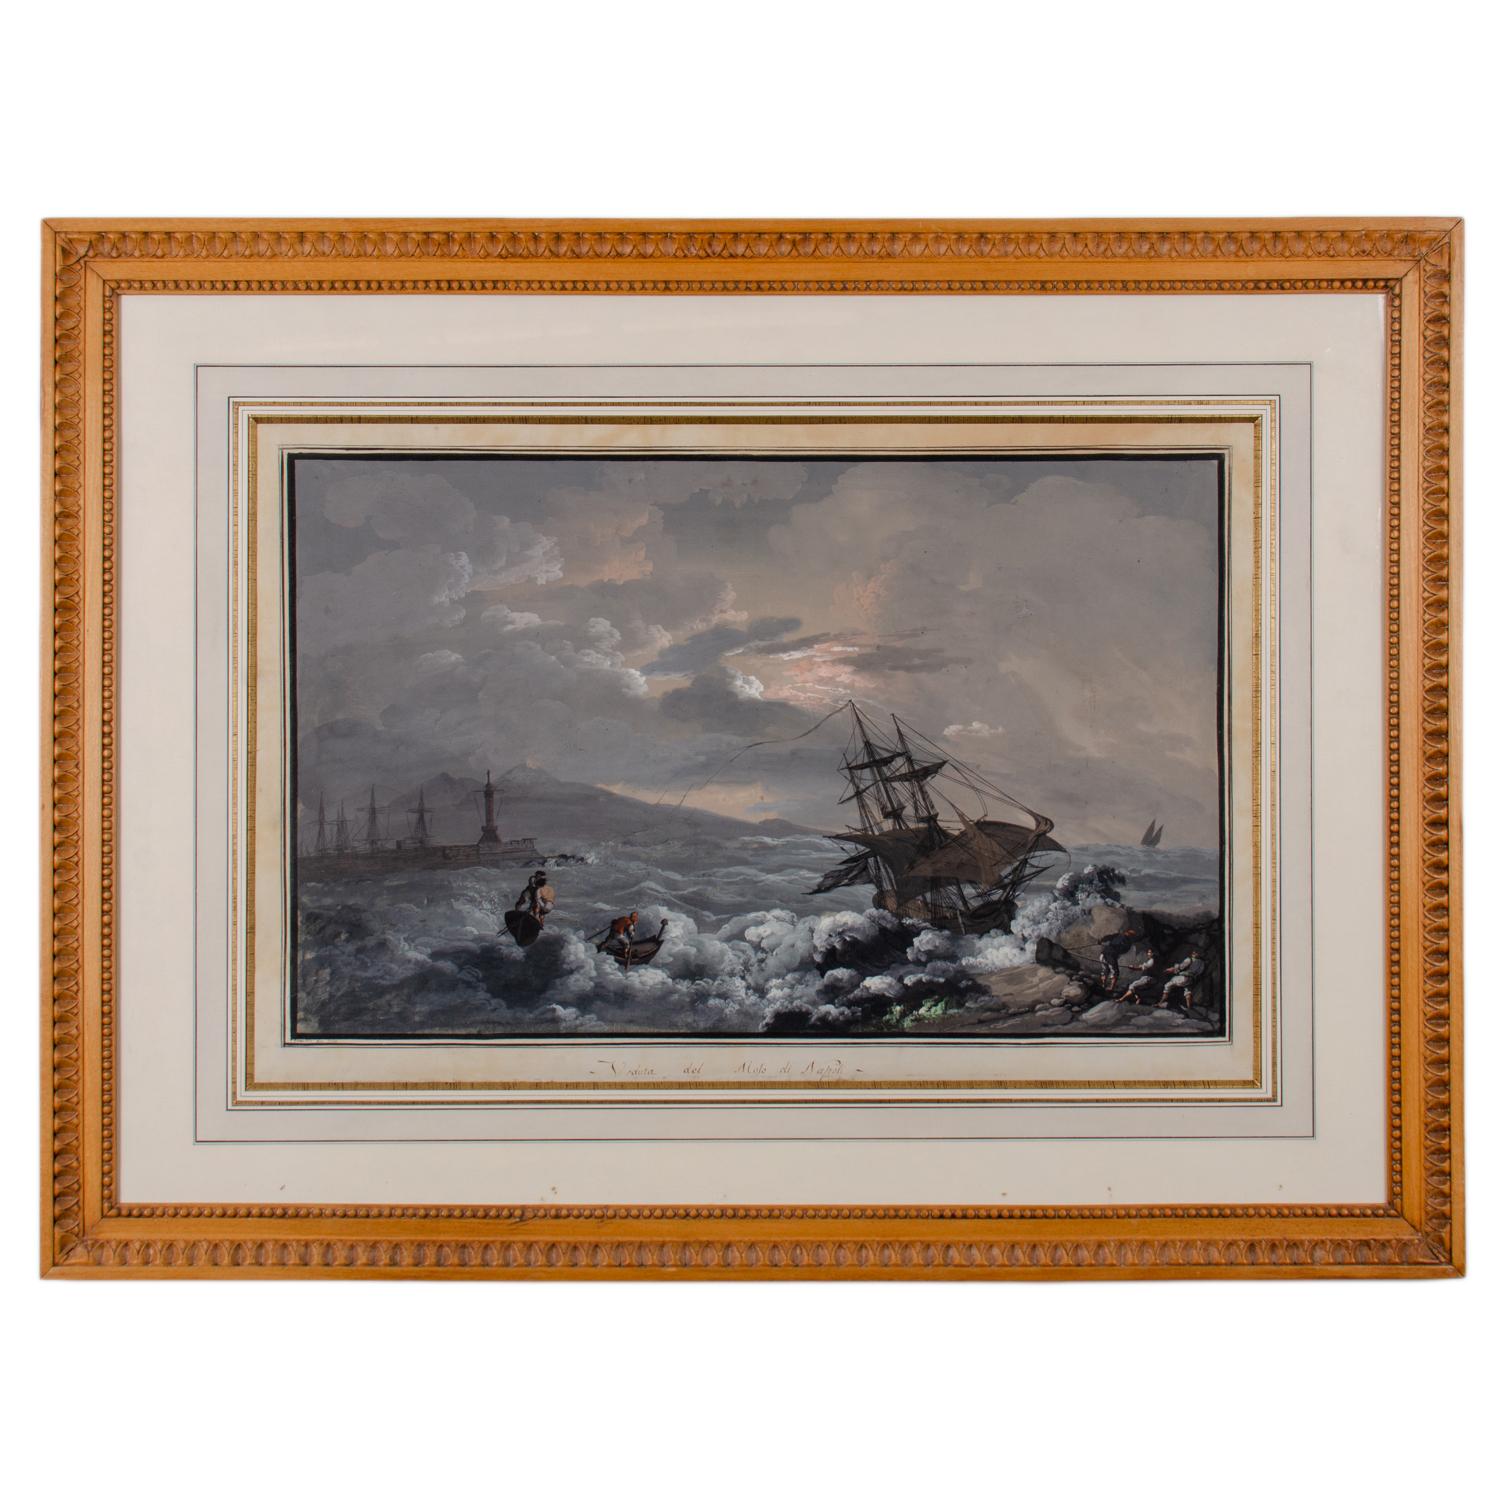 Camillo de Vito
(Italian, active 1794-1845)

Veduta del Molo di Napoli (view from the Naples pier), circa 1820s.

A gouache on paper depicting a sailing ship with men battling turbulent waters to moor a ship in distress in the port of Naples with